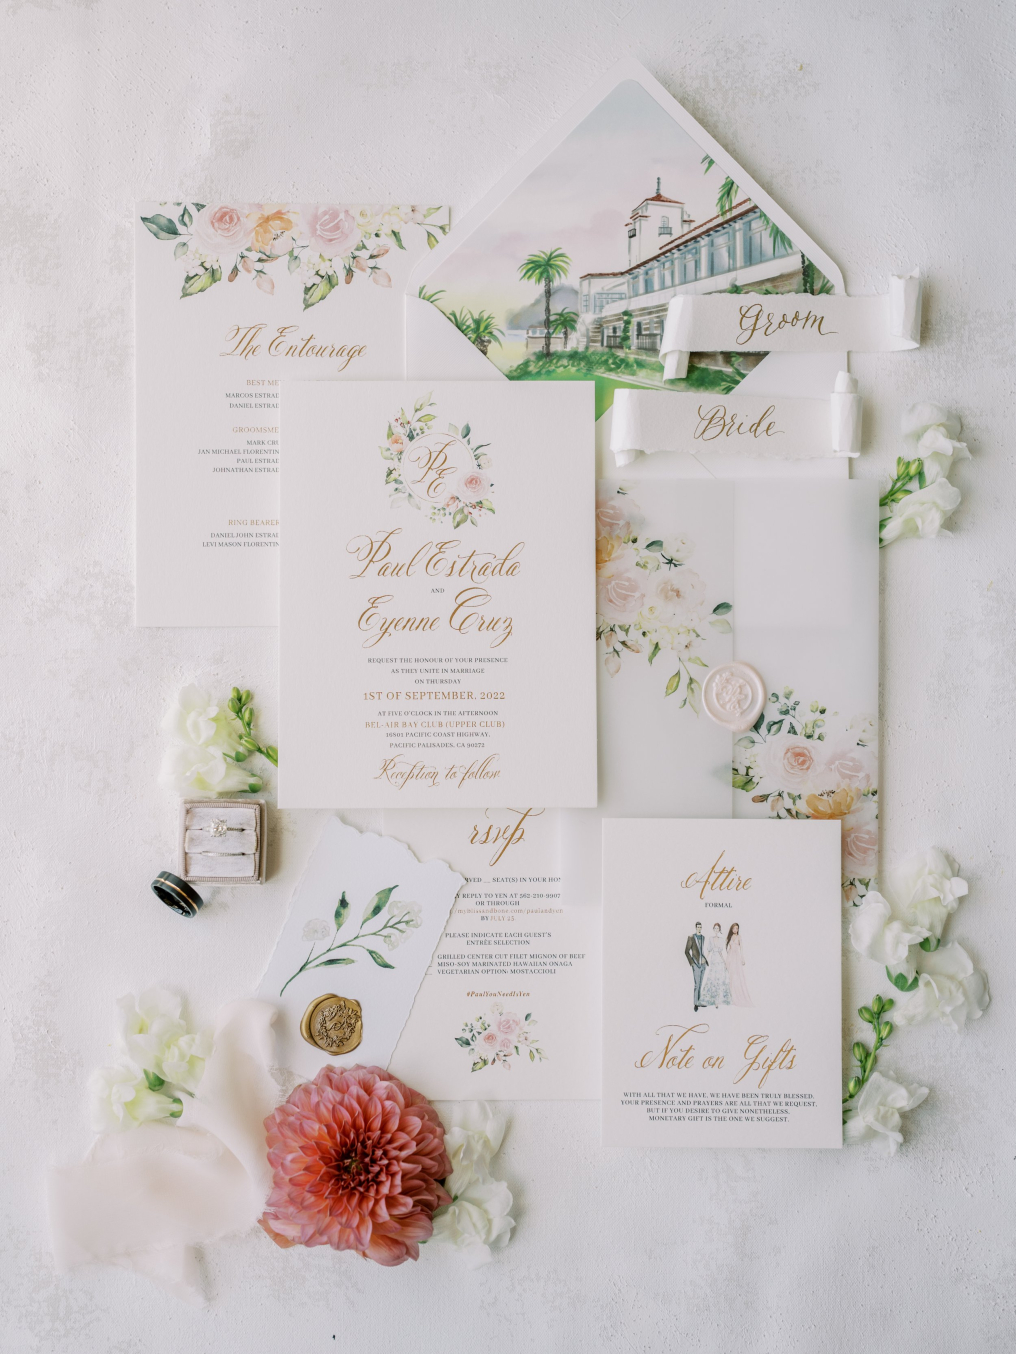 The Blushing Details Planner photo